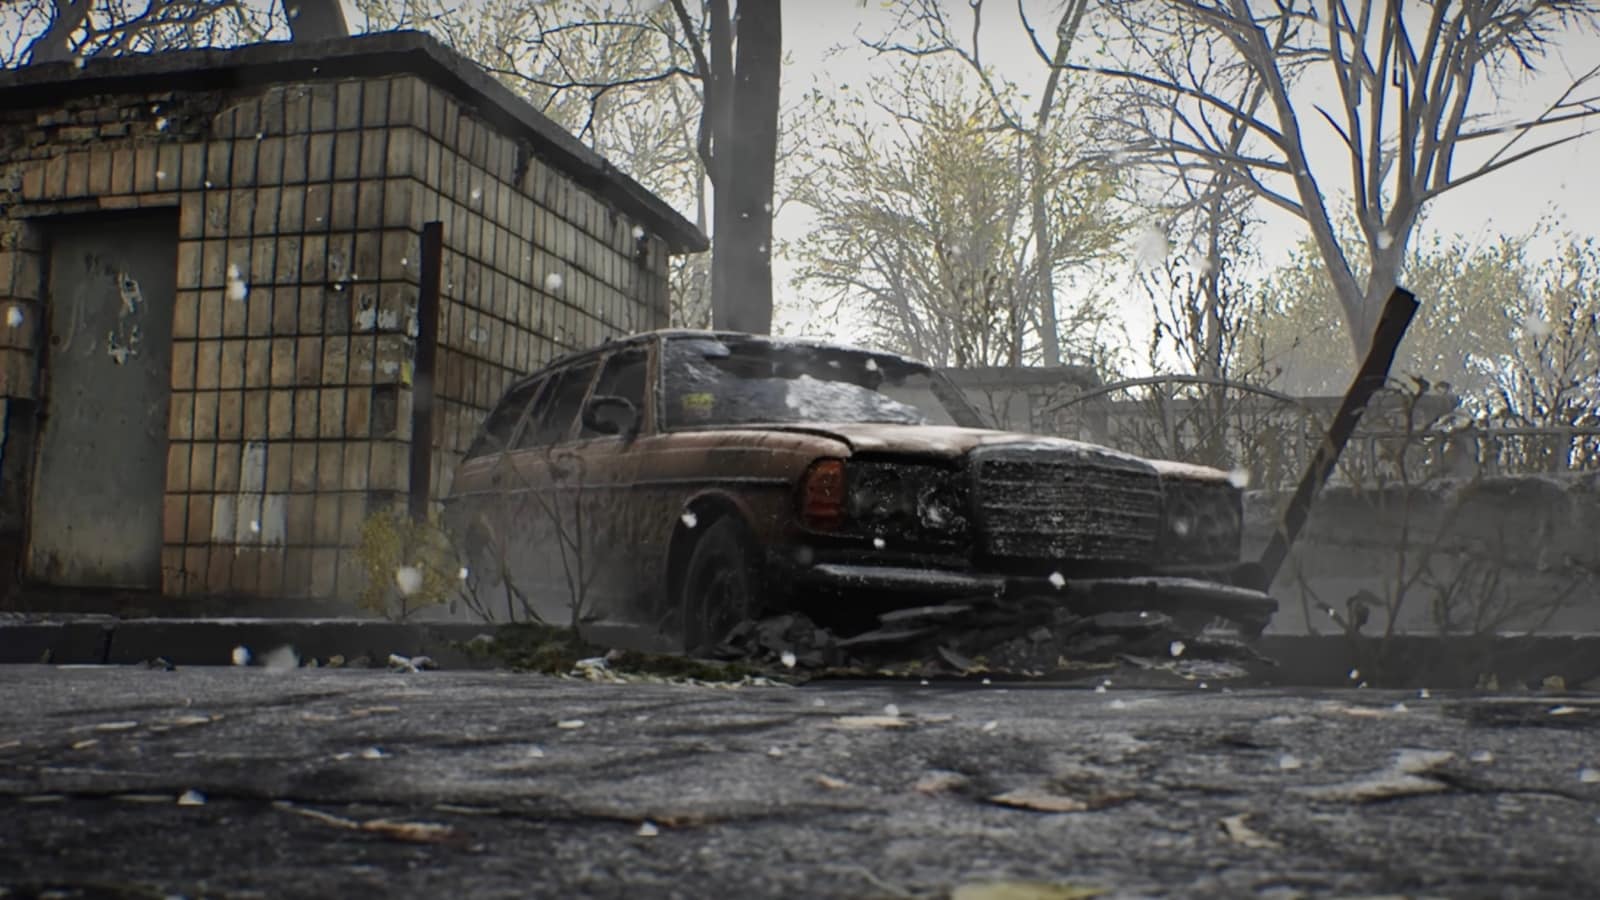 Fan Silent Hill 2 Remake in Unreal Engine 5 Shows What it Could Look Like  on the PS5 - TechEBlog